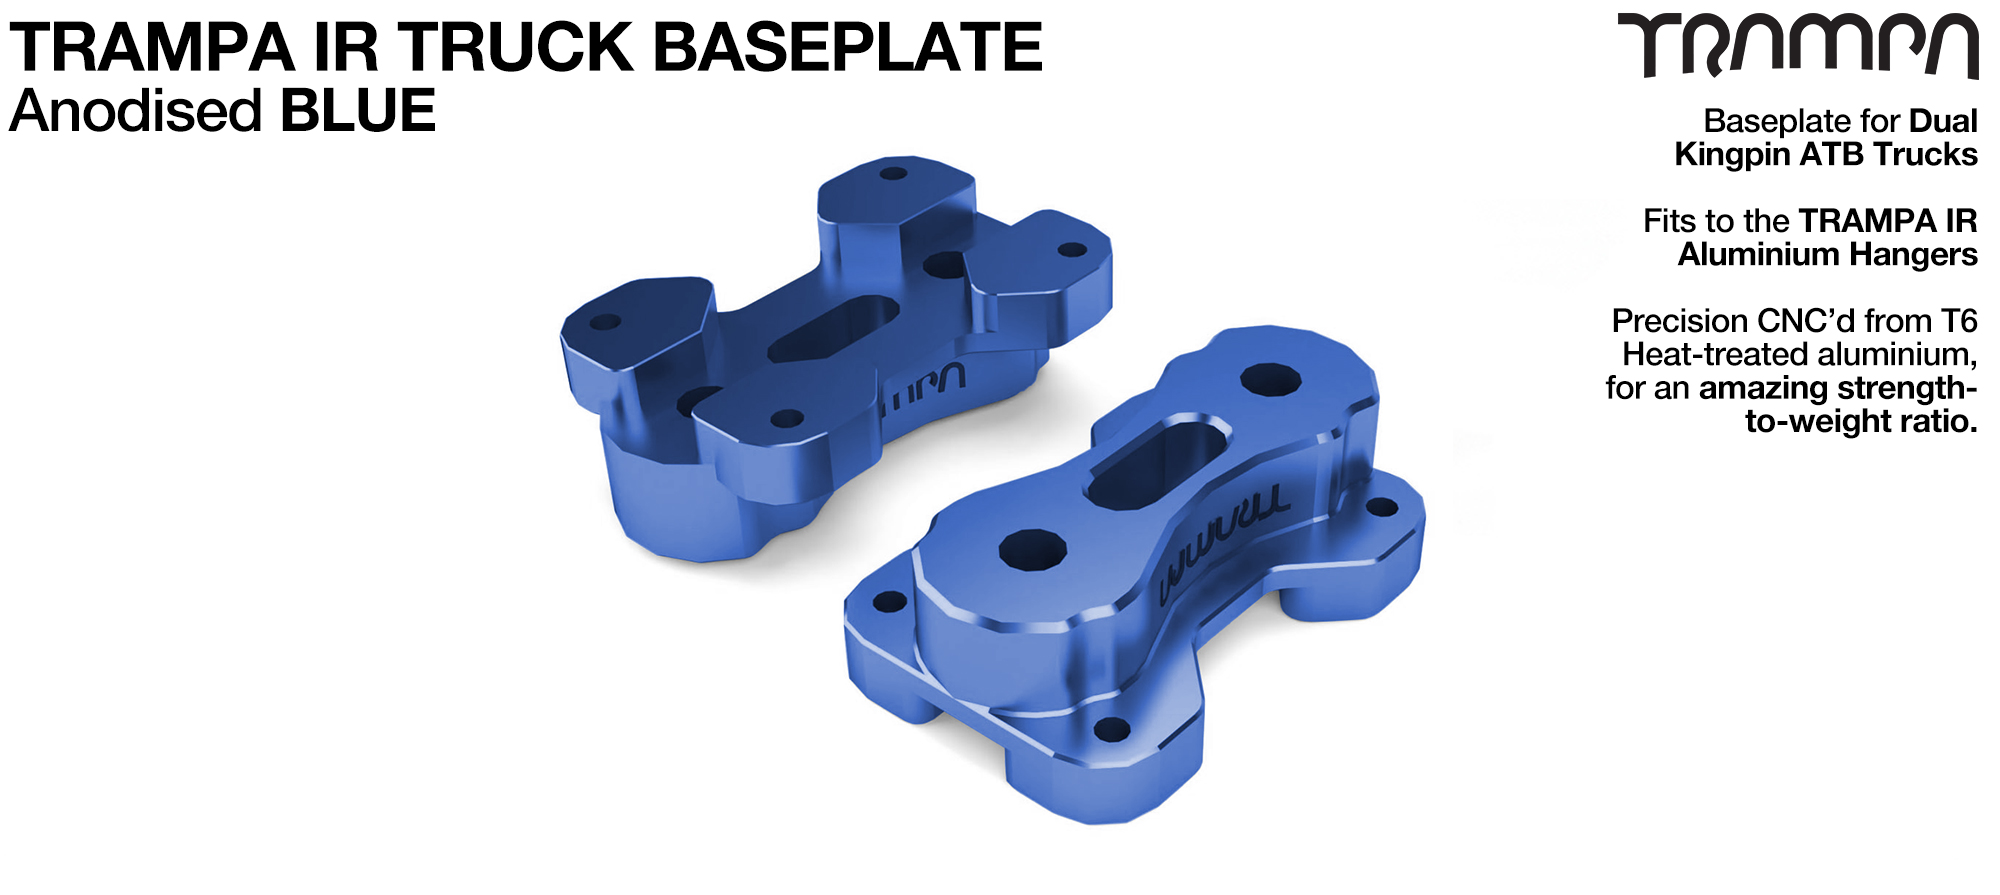 TRAMPA IR BASEPLATE - CNC Precision made TRAMPA IR Trucks are super light & Packed with performance - BLUE